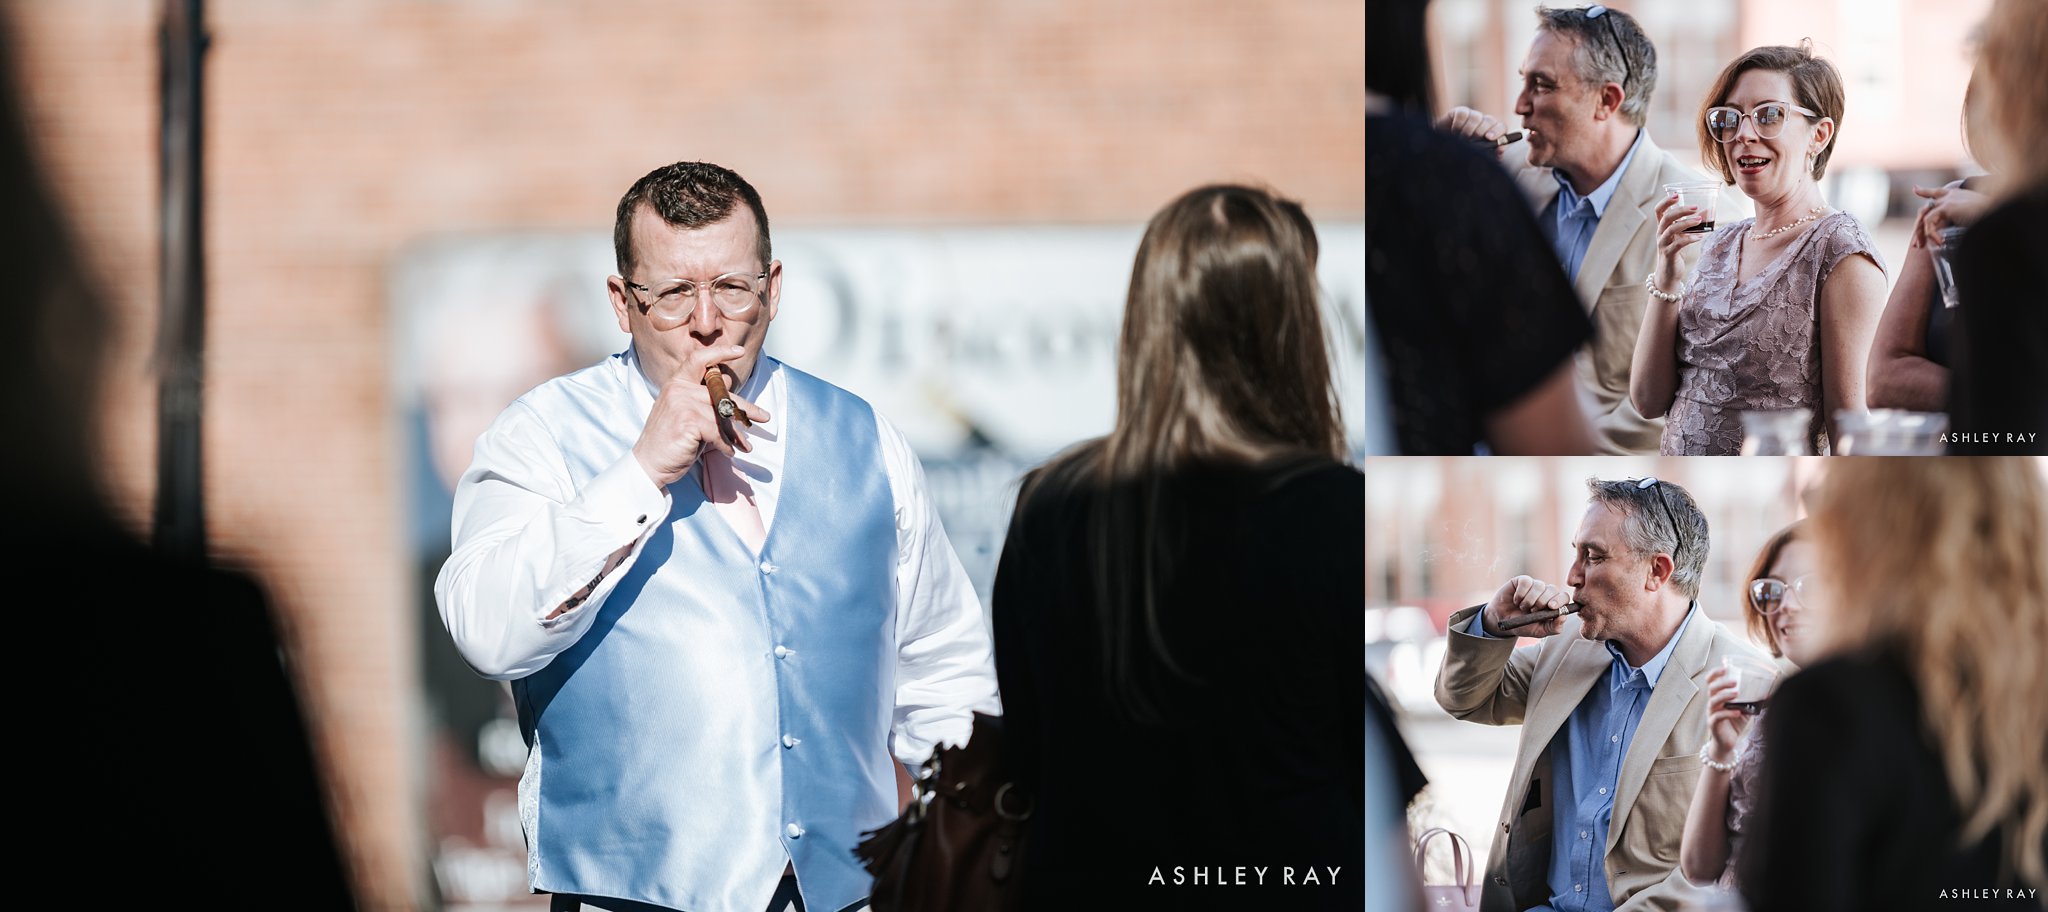 Sunny Spring Summer Wedding Photography at The Venue at Anthony's in Downtown Wapakoneta, Ohio